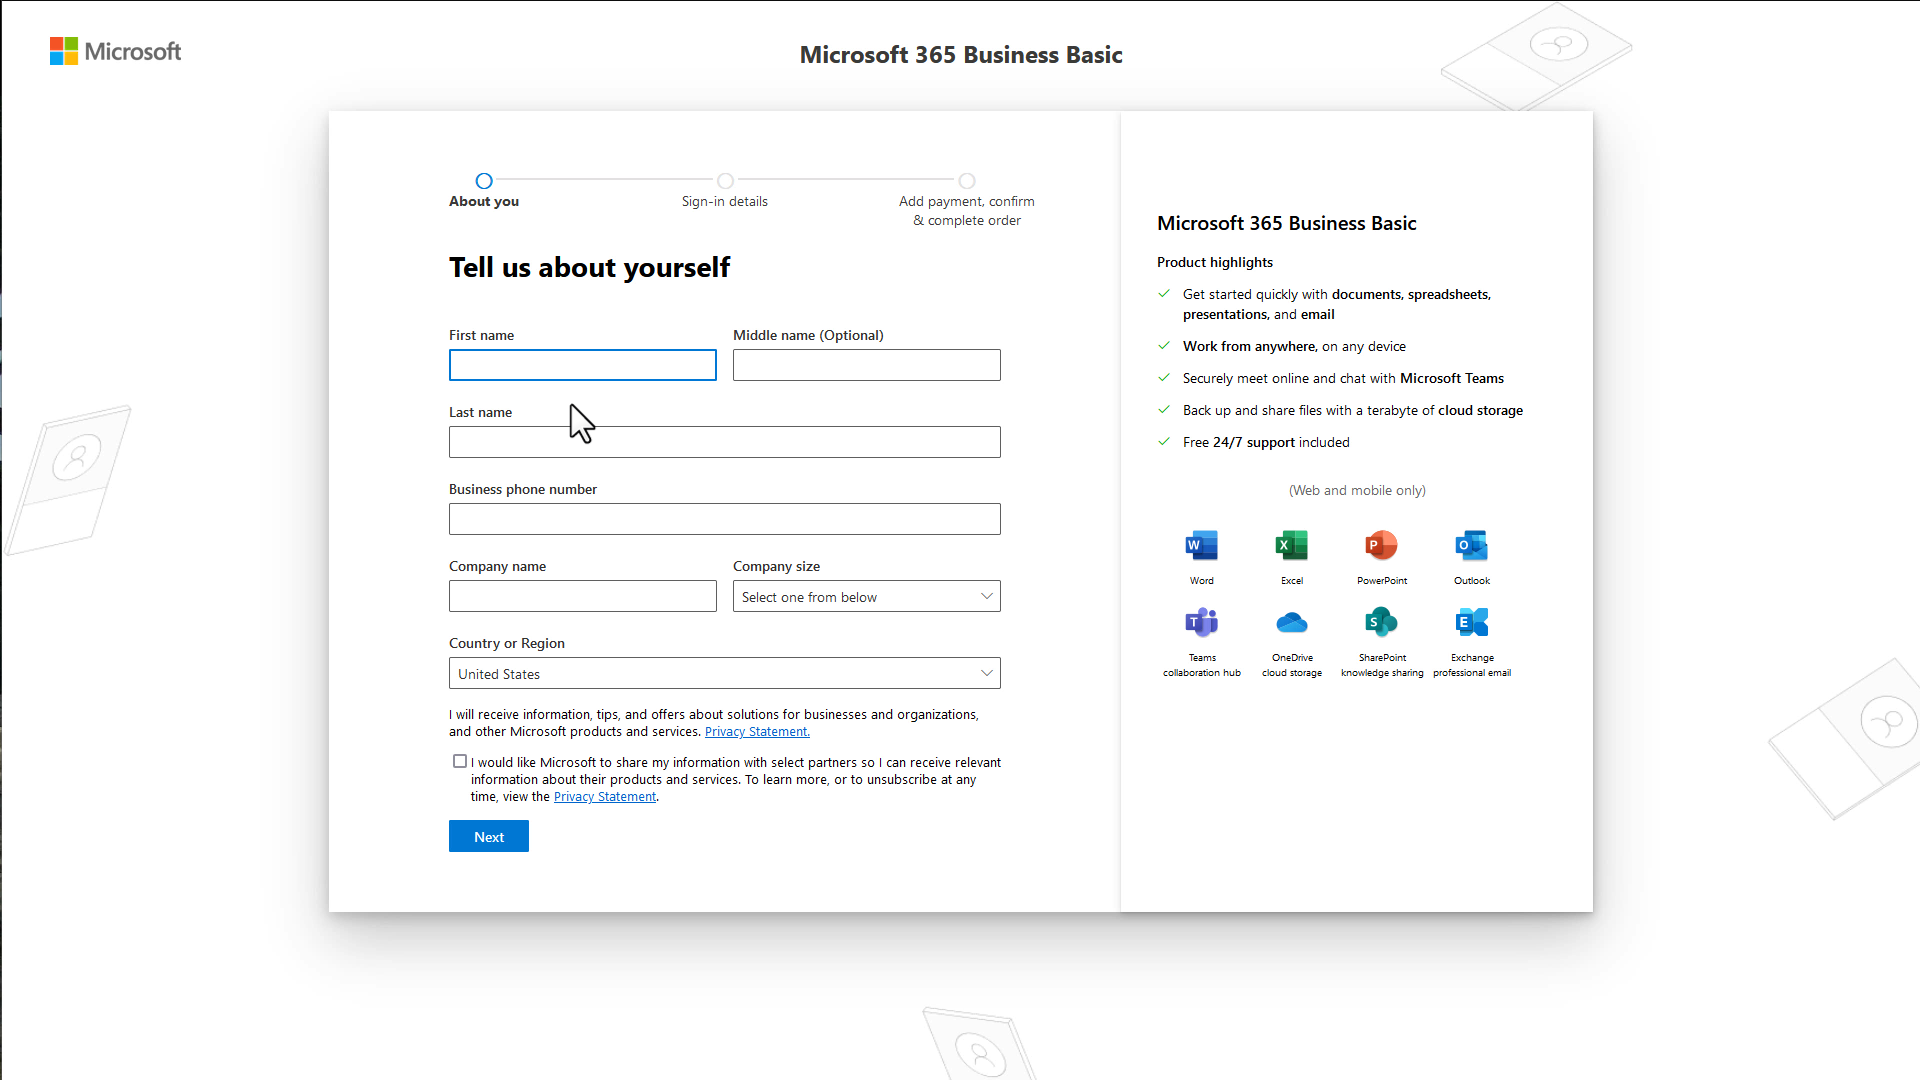 Personal information step for Microsoft 365